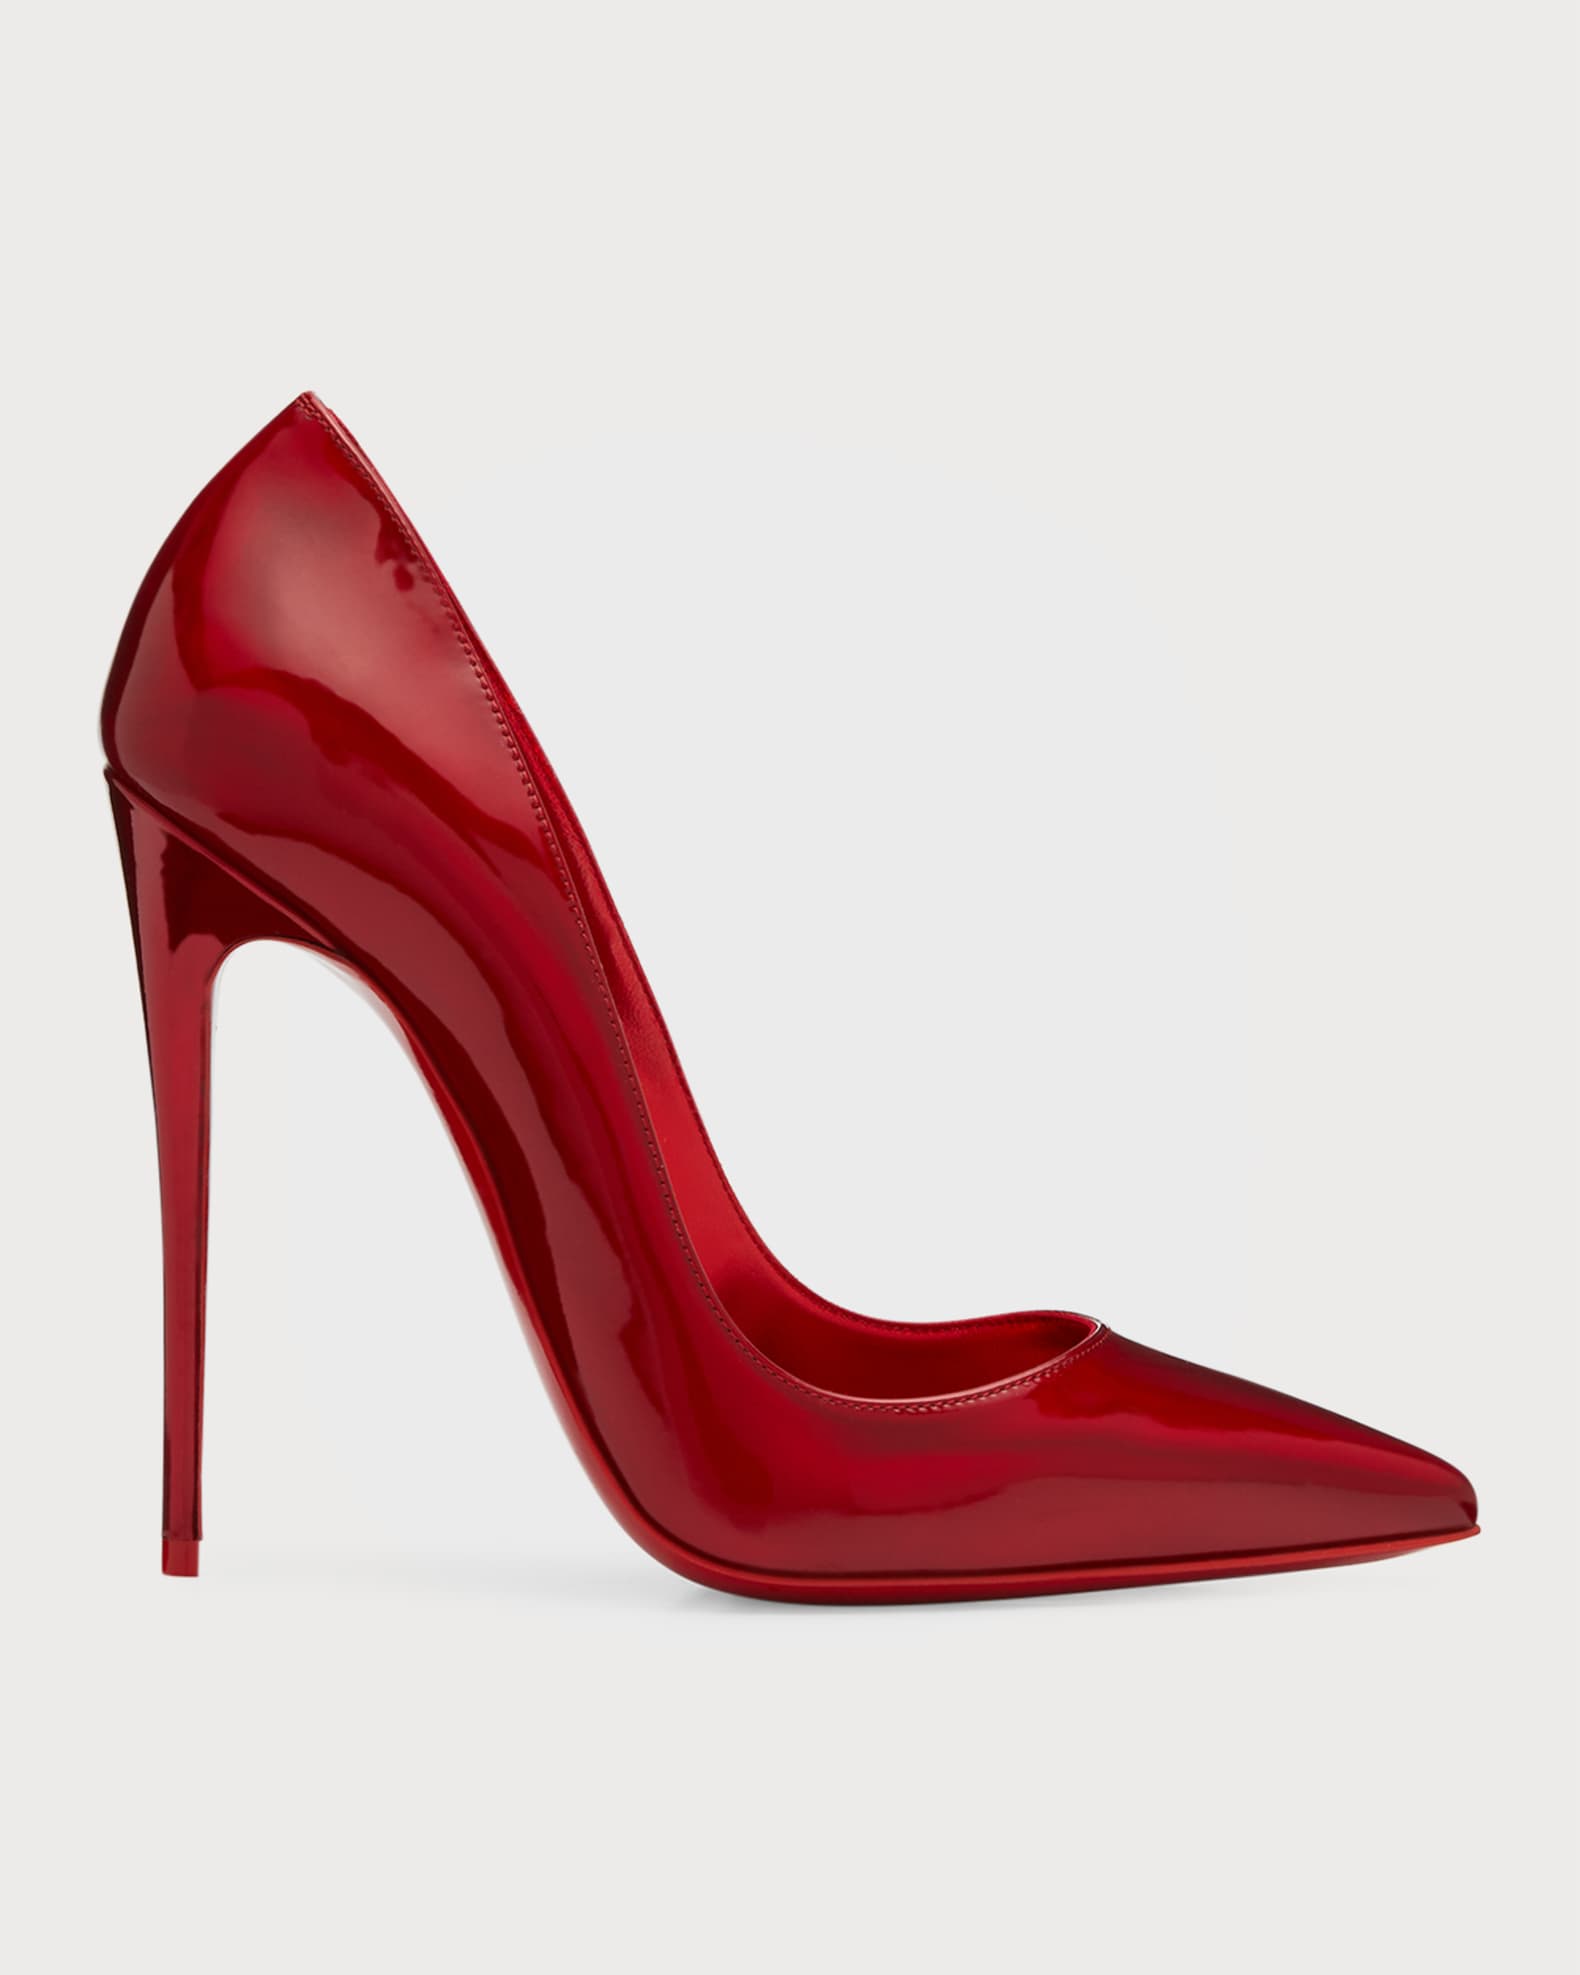 Christian Louboutin So Kate Patent Red Sole Pumps | Neiman Marcus